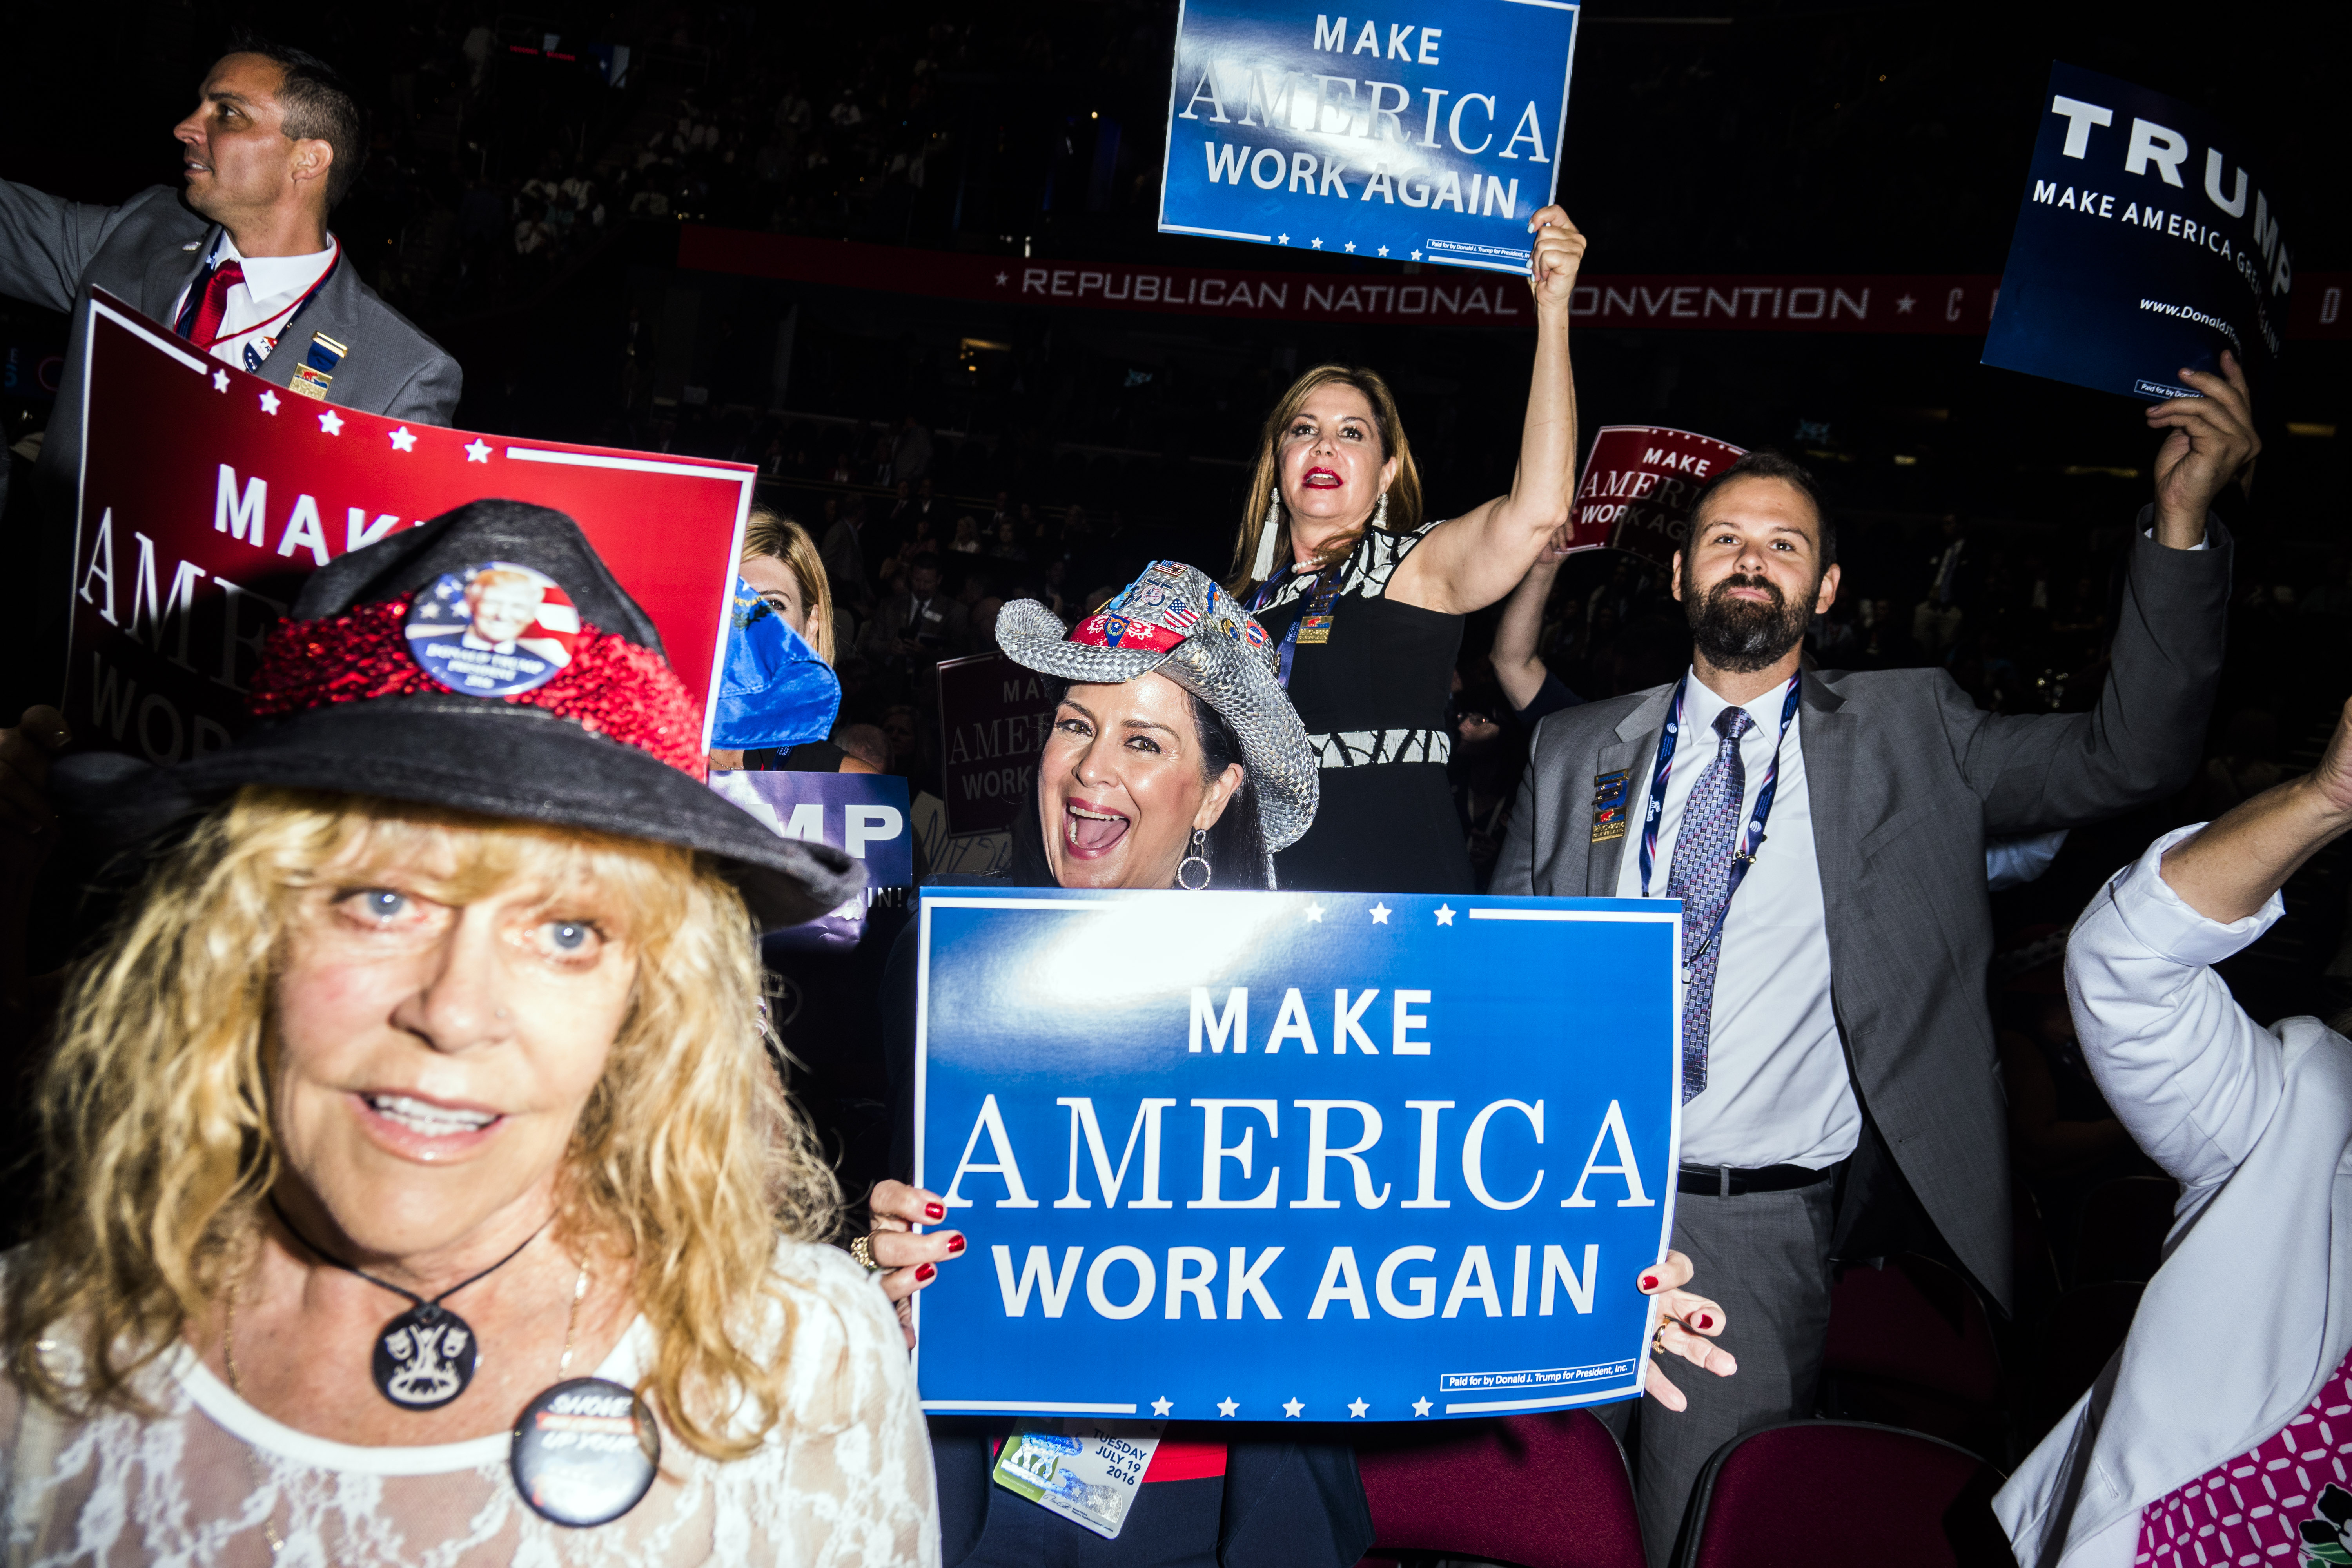 Attendees hold signs at the Republican National Convention in Cleveland on Tuesday, July 19, 2016.